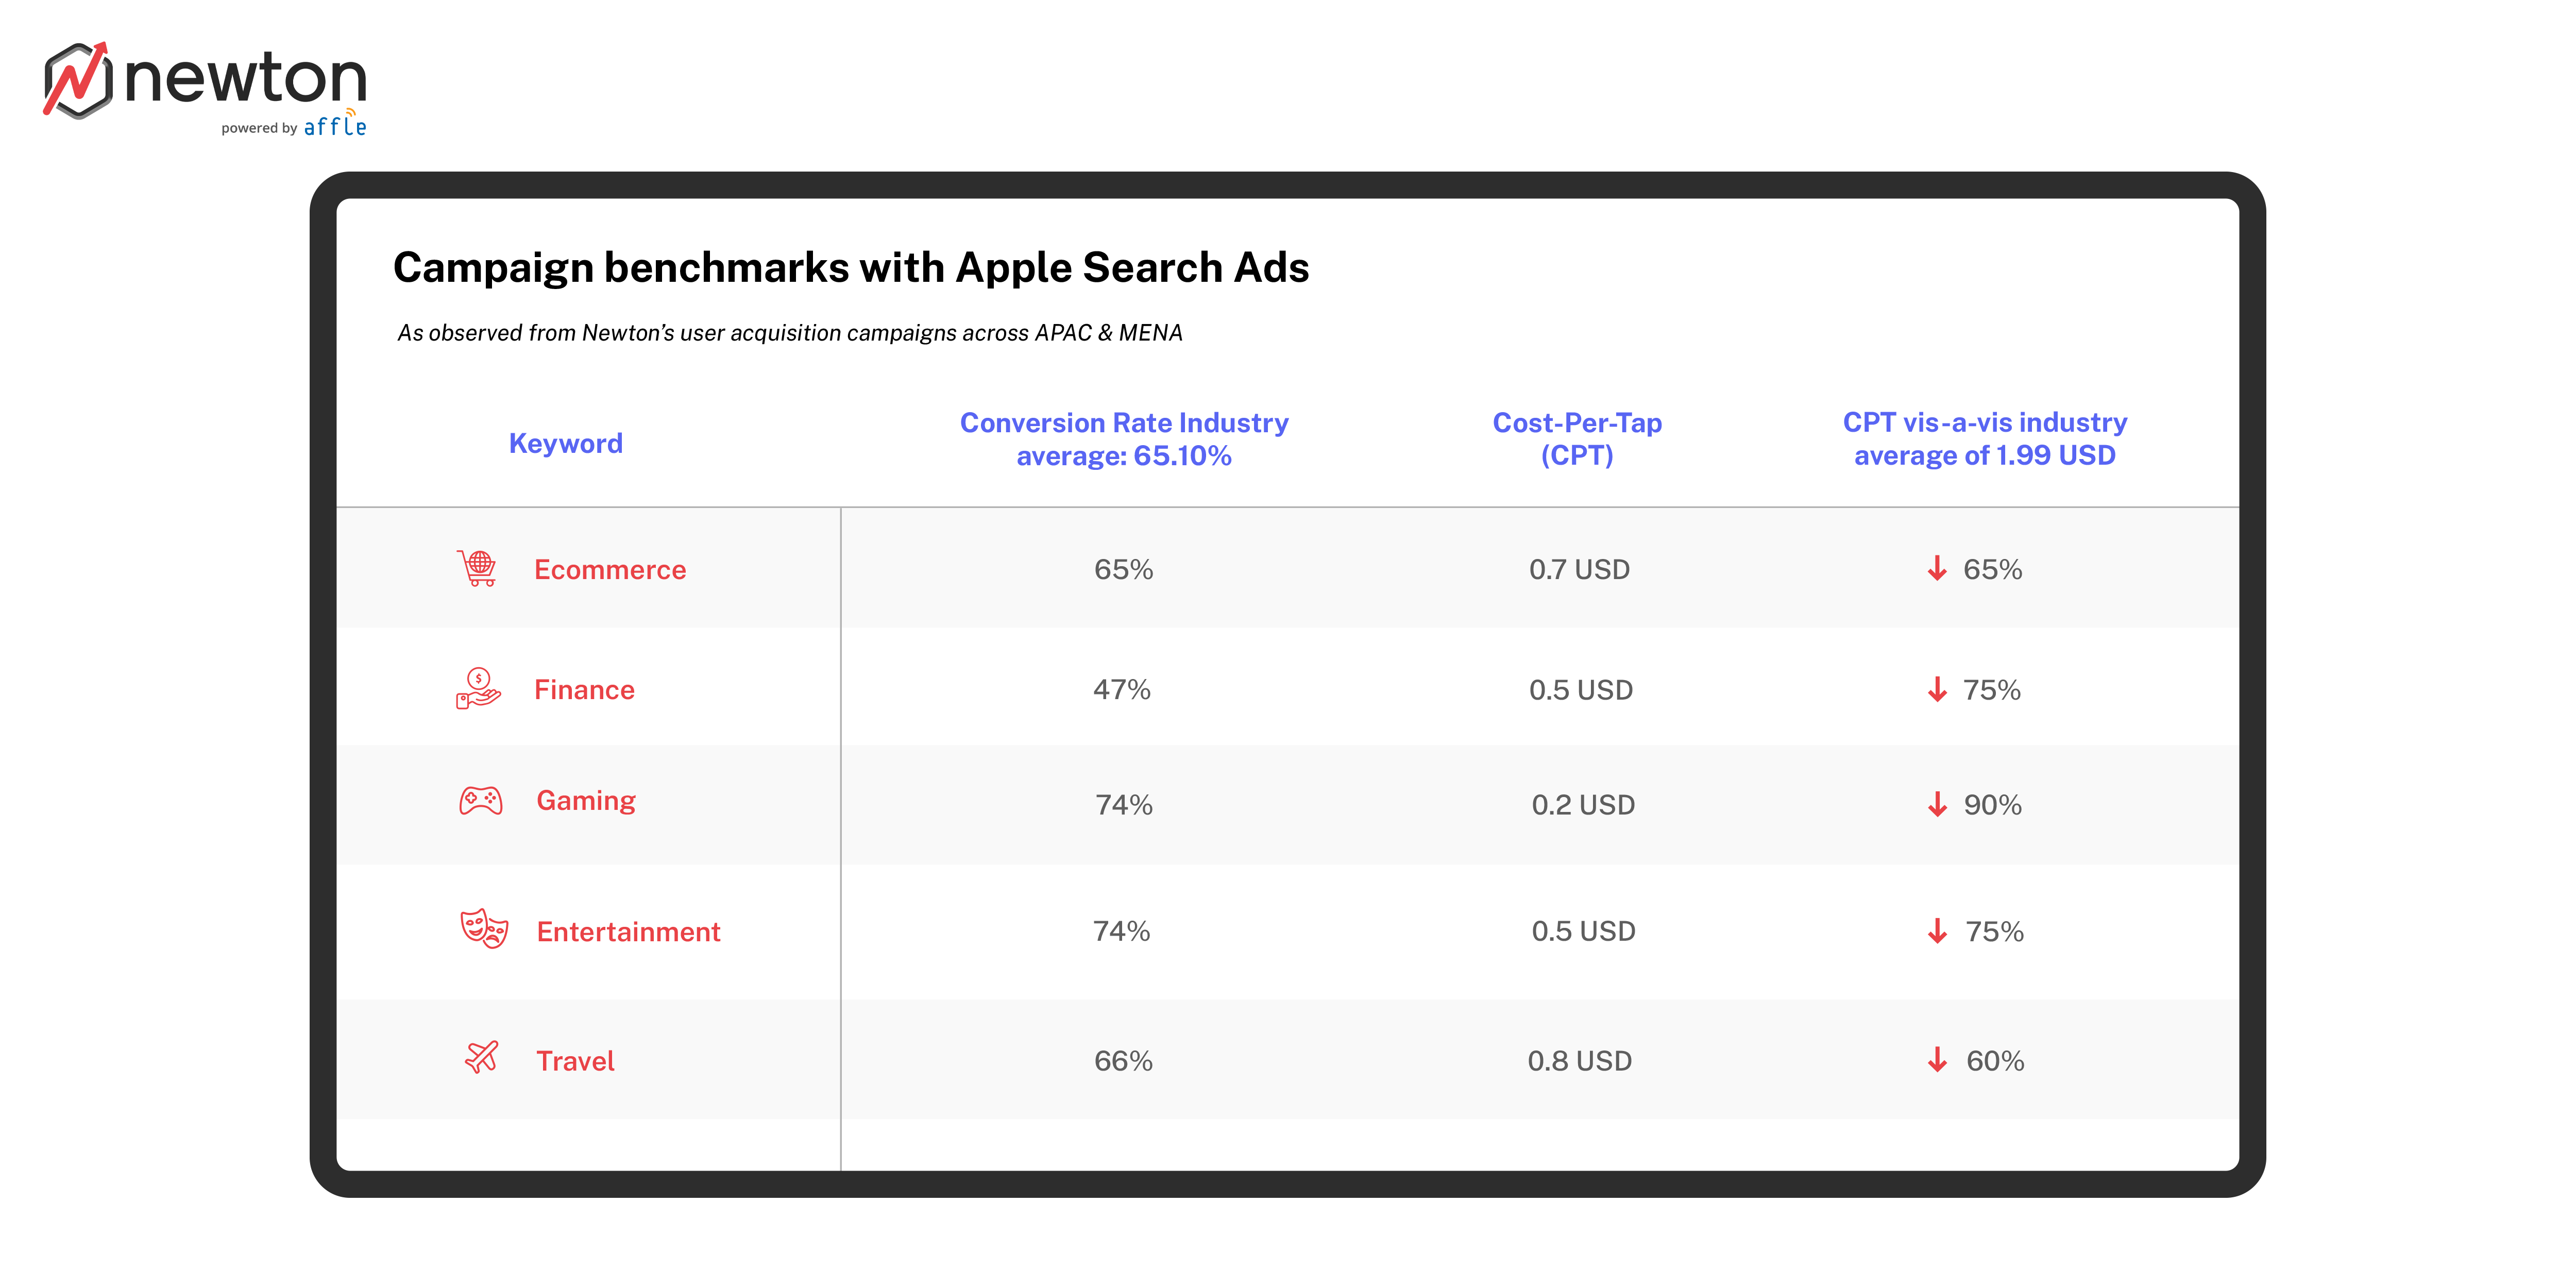 Apple-search-ads-festive-season-user-acquisition-conversion-benchmarks-by-category